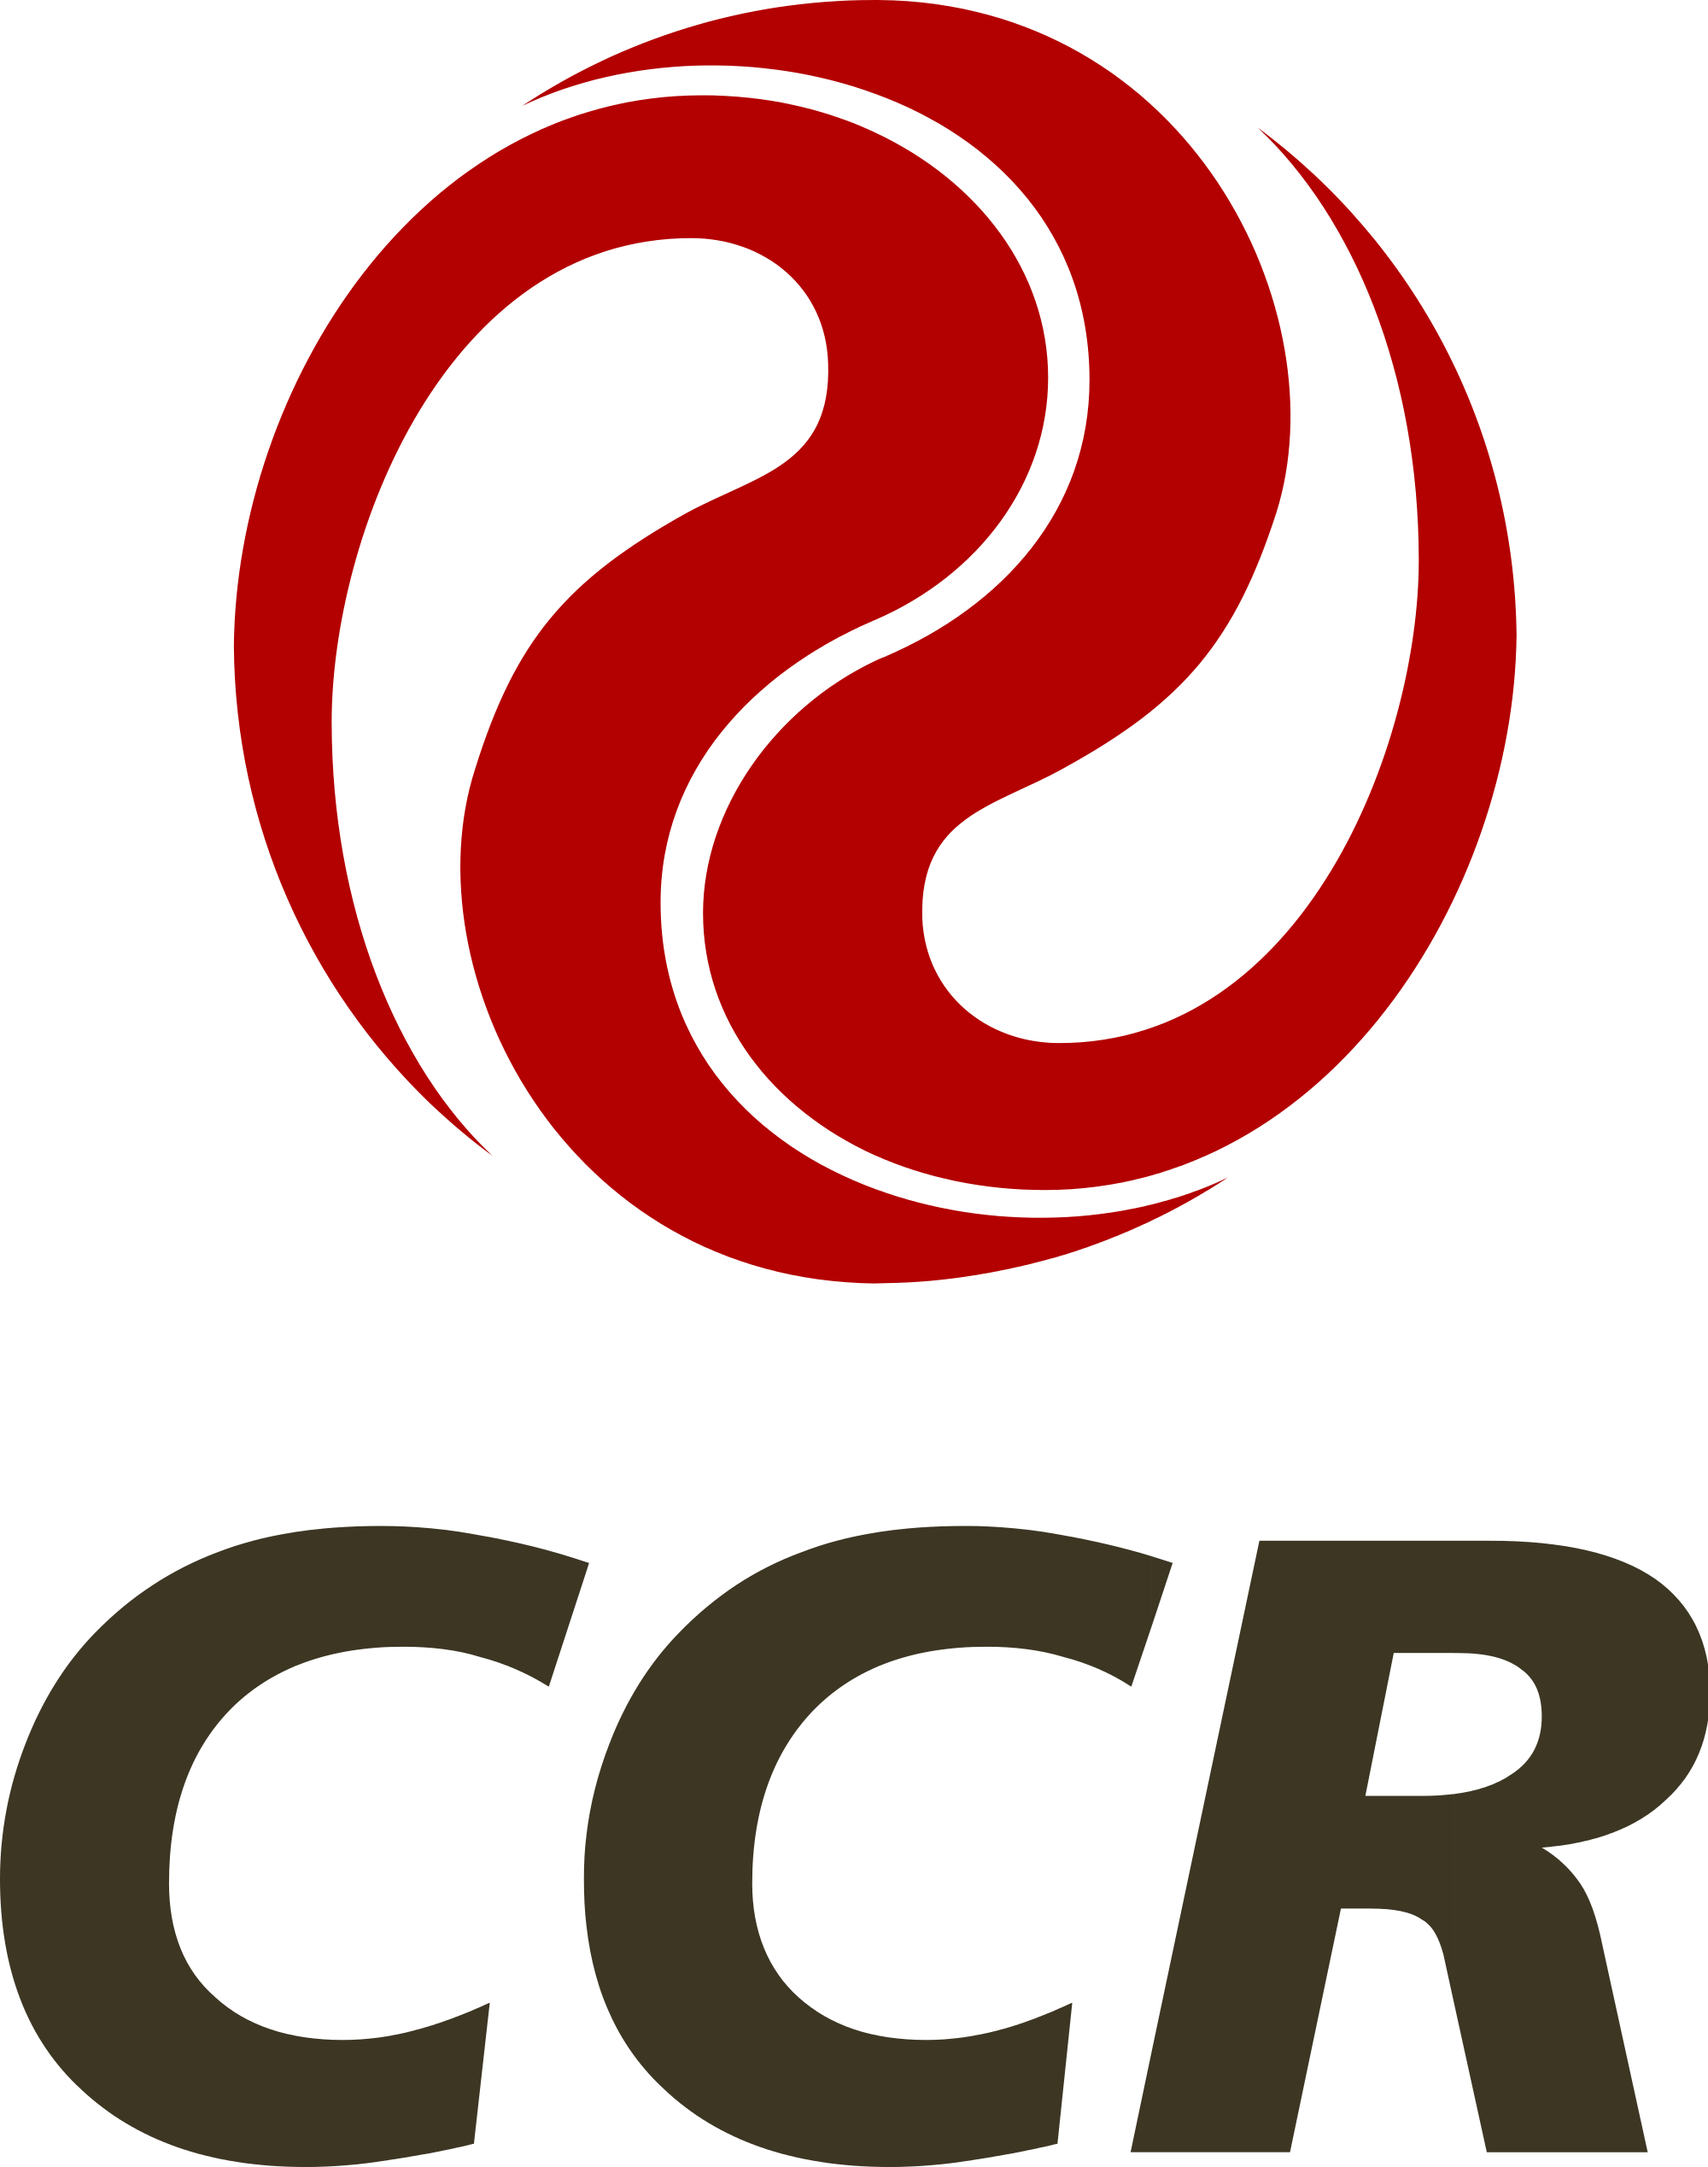 The CCR Group